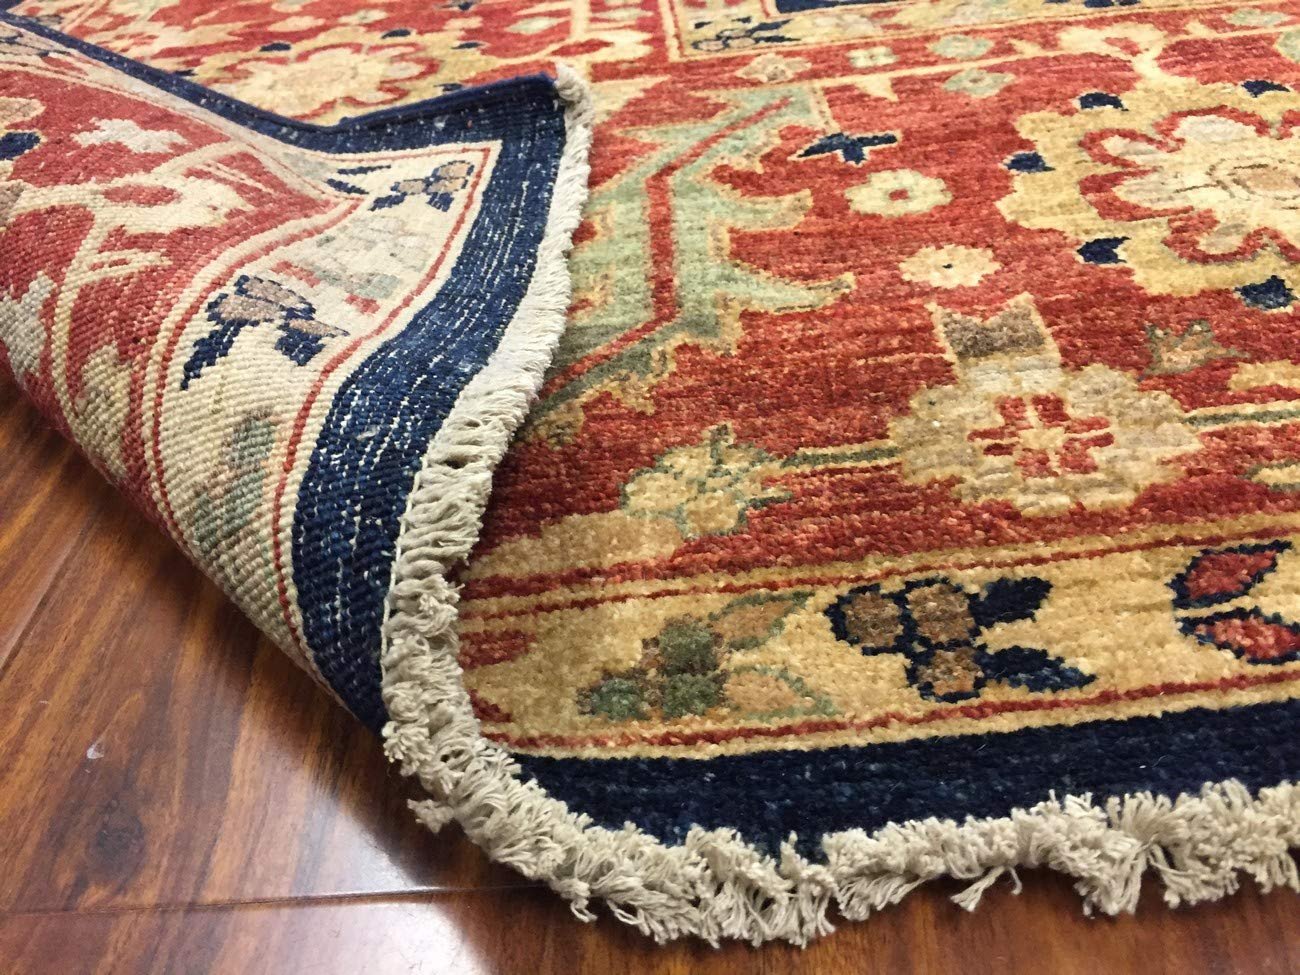 Hand Knotted Pakistani Rug-Ziegler-Navy Blue/Red/Multi-(18.3 by 11.6 Feet)